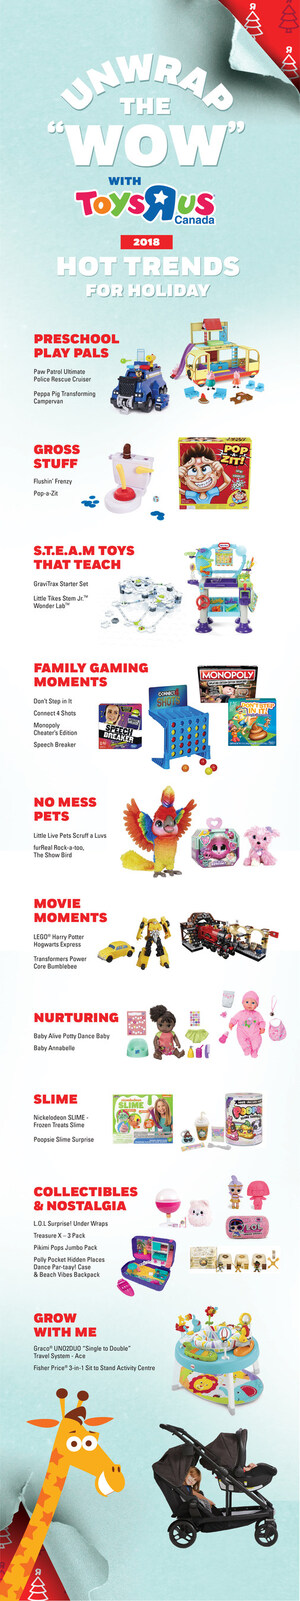 The countdown to Christmas is on: Toys "R" Us (Canada) Ltd. announces its 2018 Hot Holiday Trends